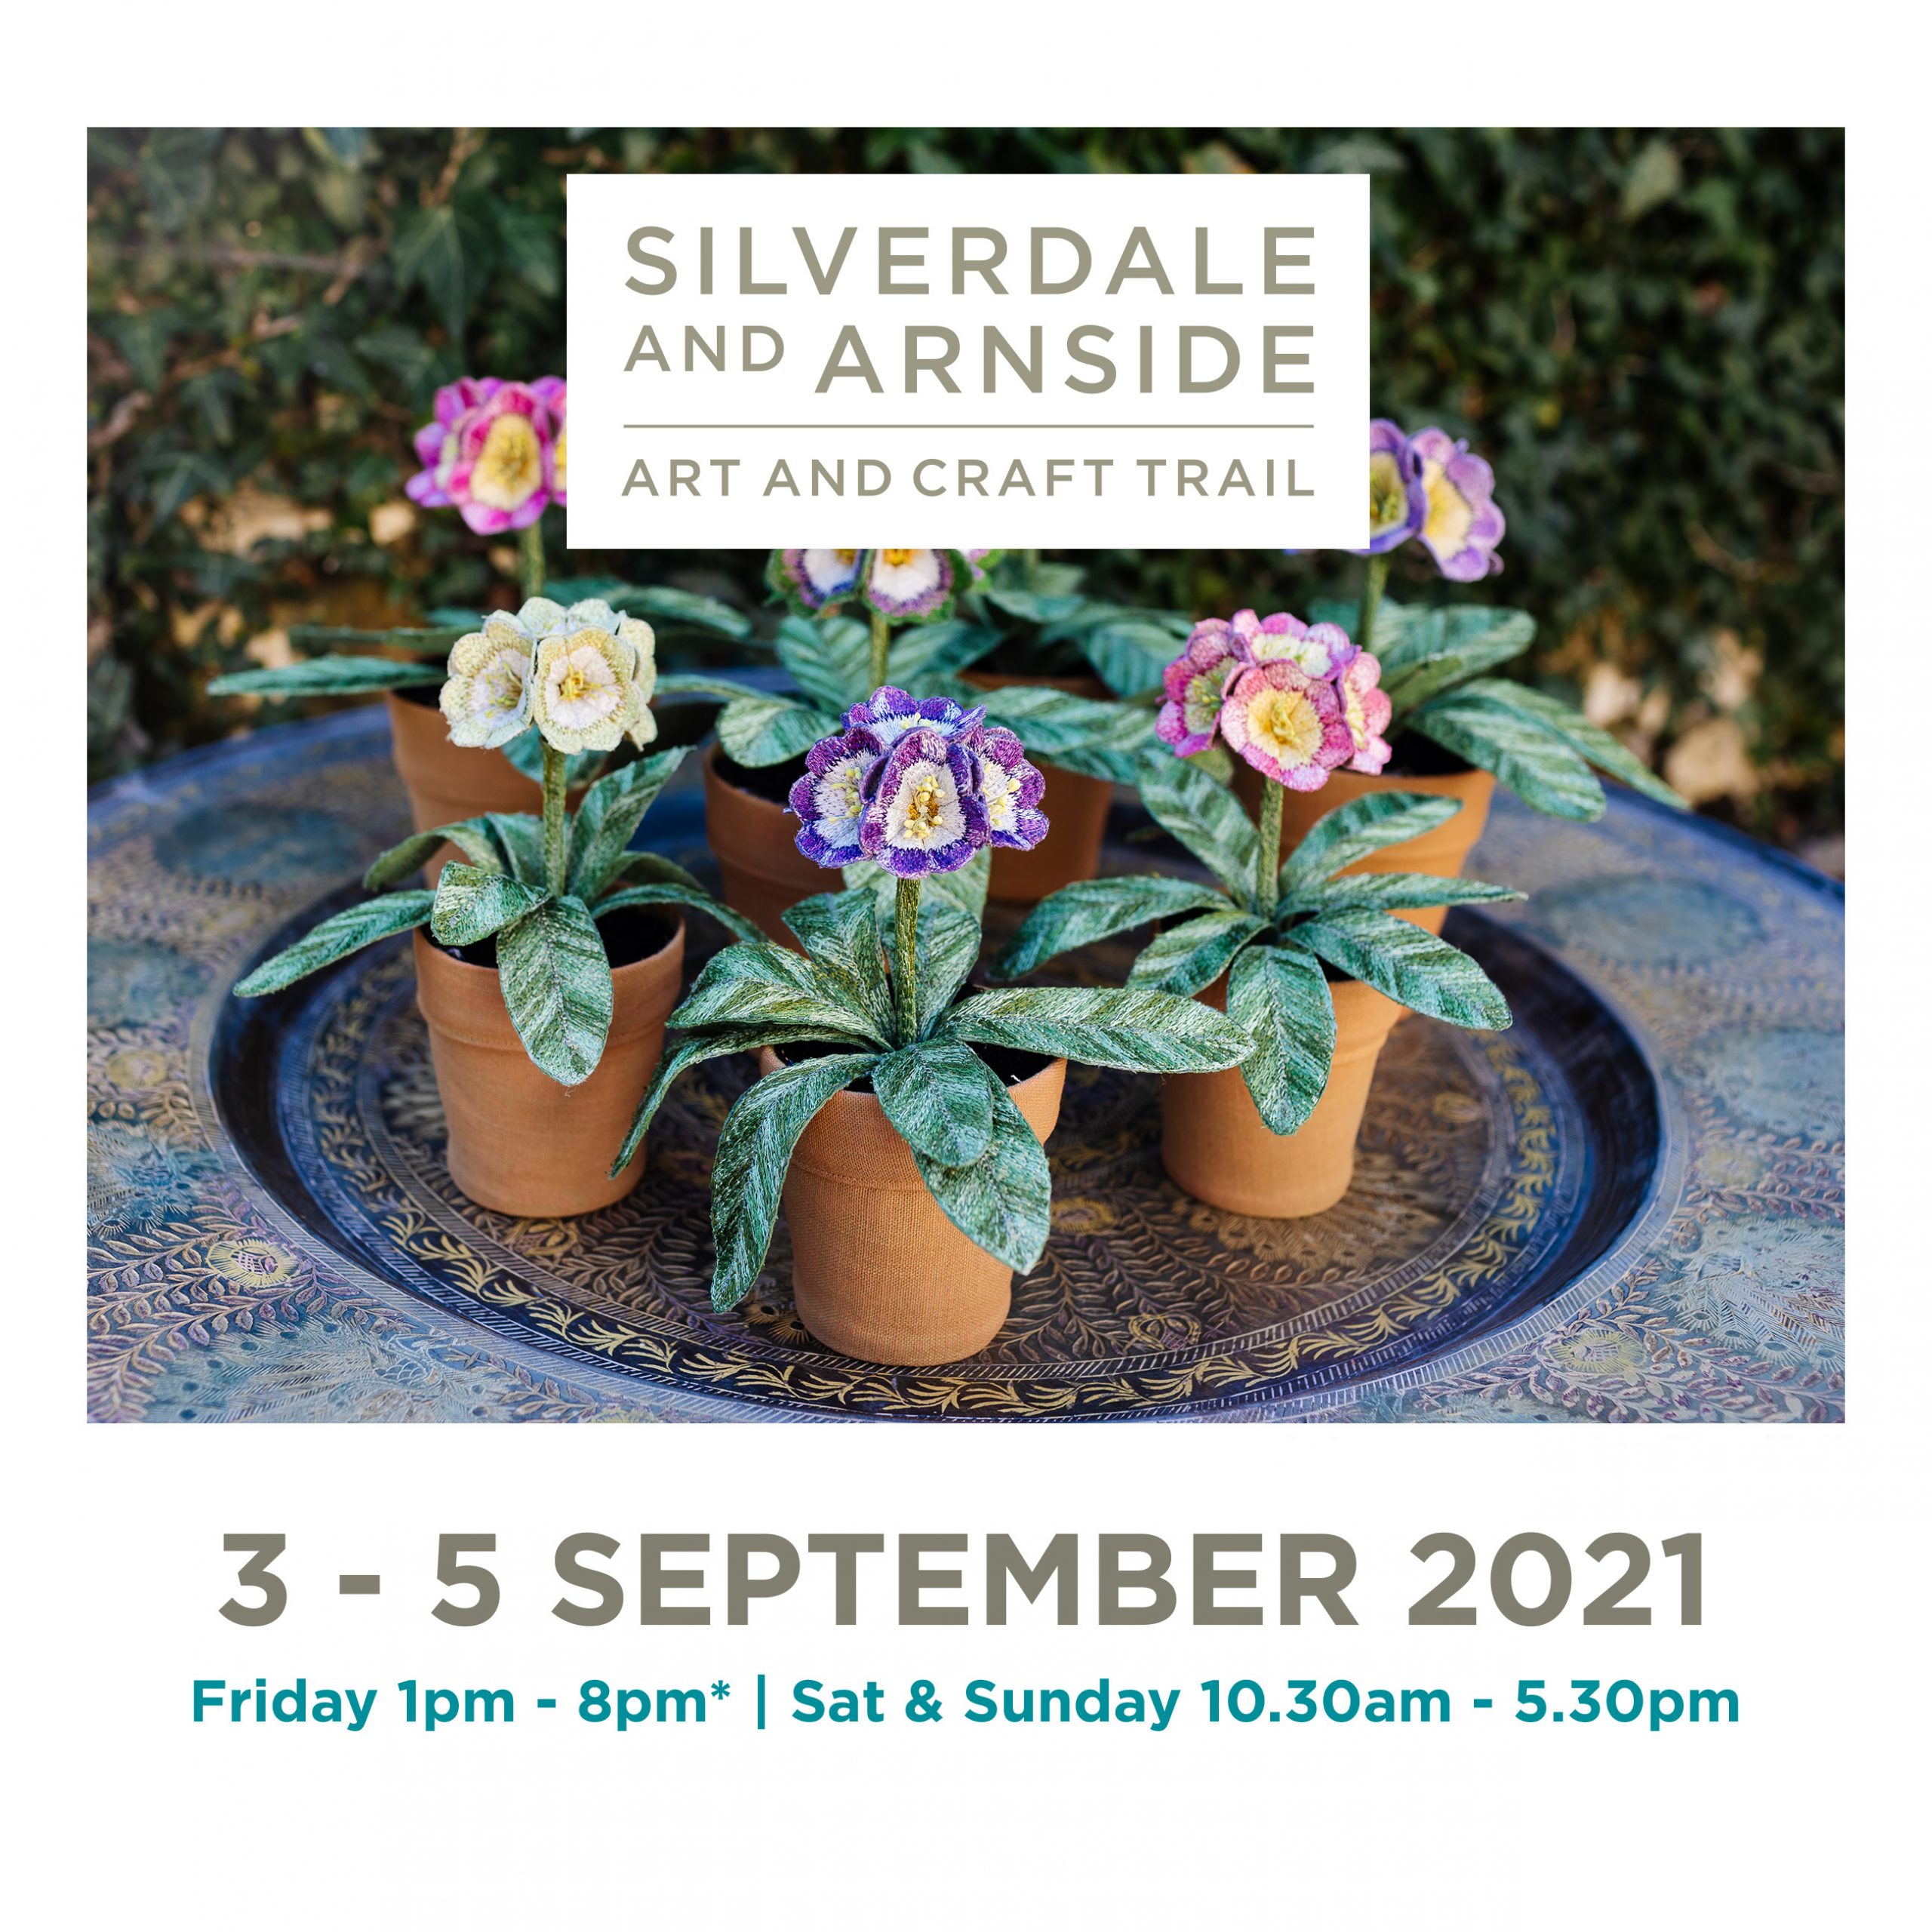 Corinne Young - Silverdale & Arnside Art & Craft Trail 2021